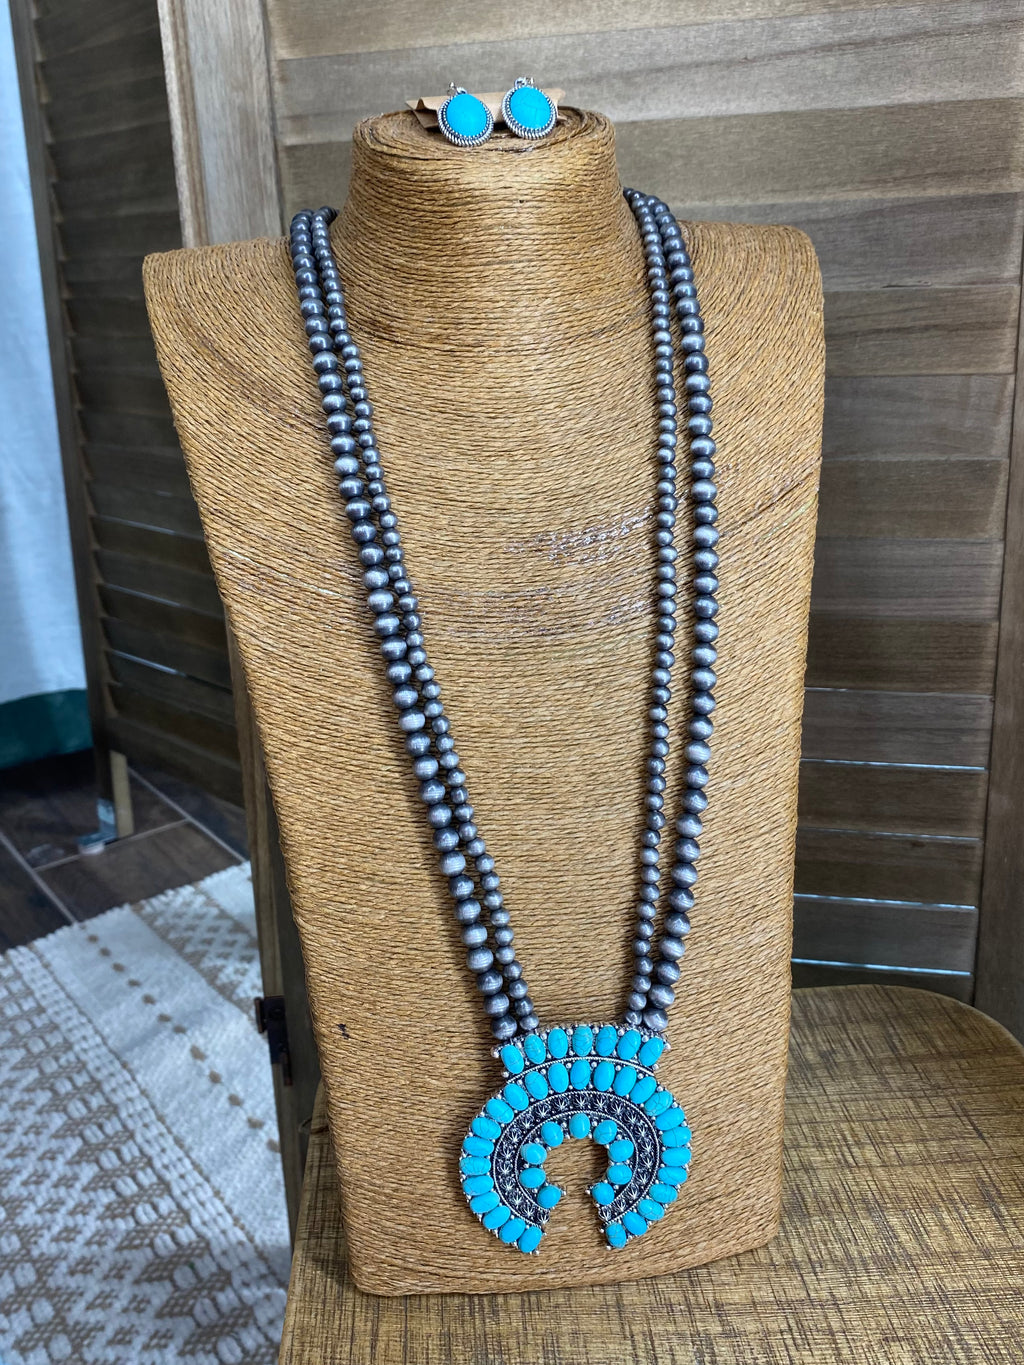 Long Navajo Pearl Necklace With Turquoise Pendant